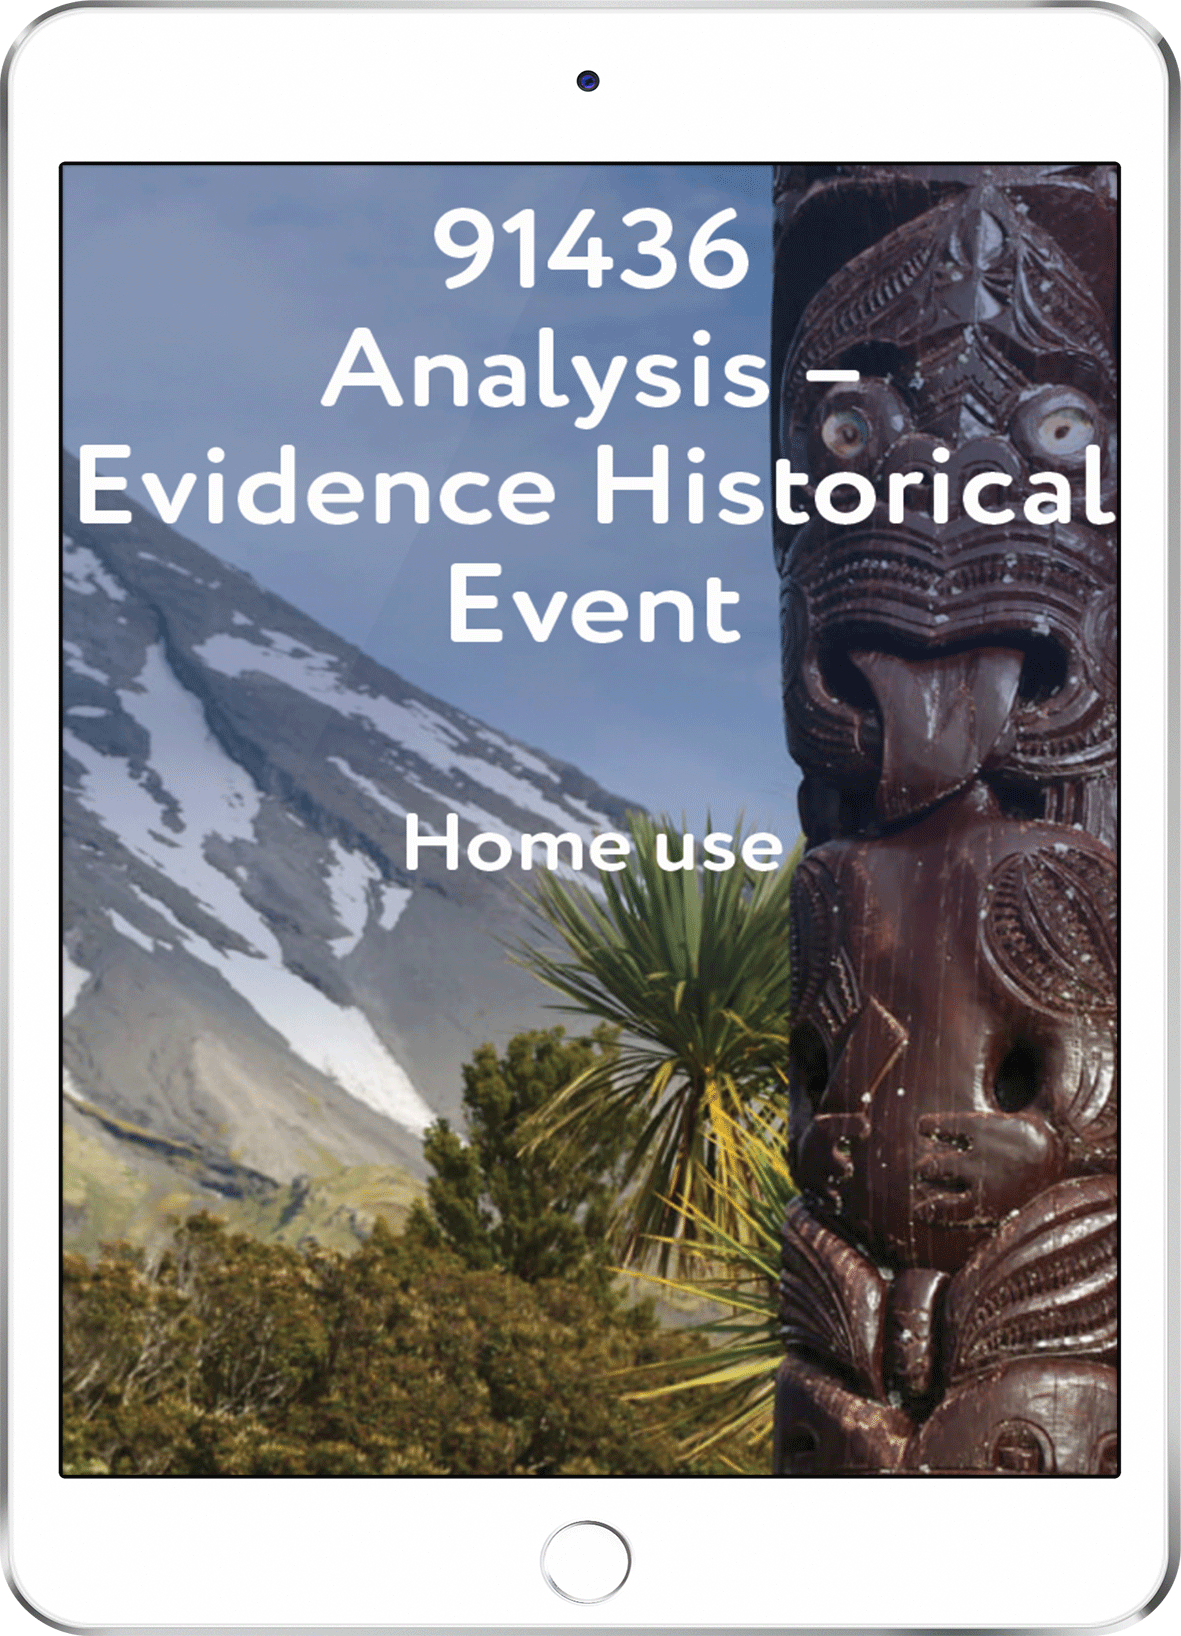 91436 Analysis - Evidence Historical Event - Home Use